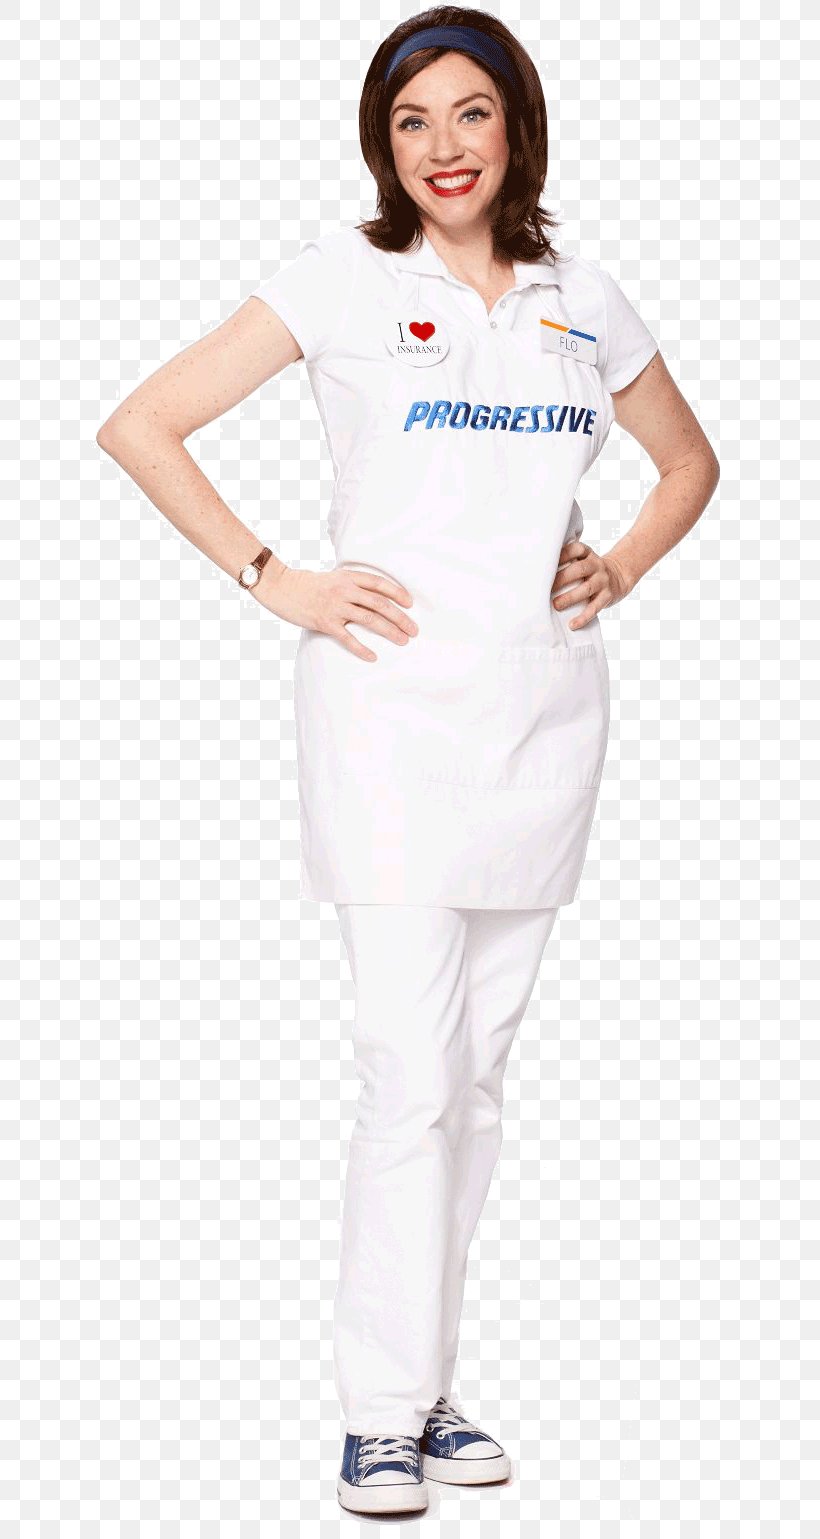 Flo T-shirt Costume Shoulder Sleeve, PNG, 636x1539px, Flo, Abdomen, Arm, Clothing, Costume Download Free